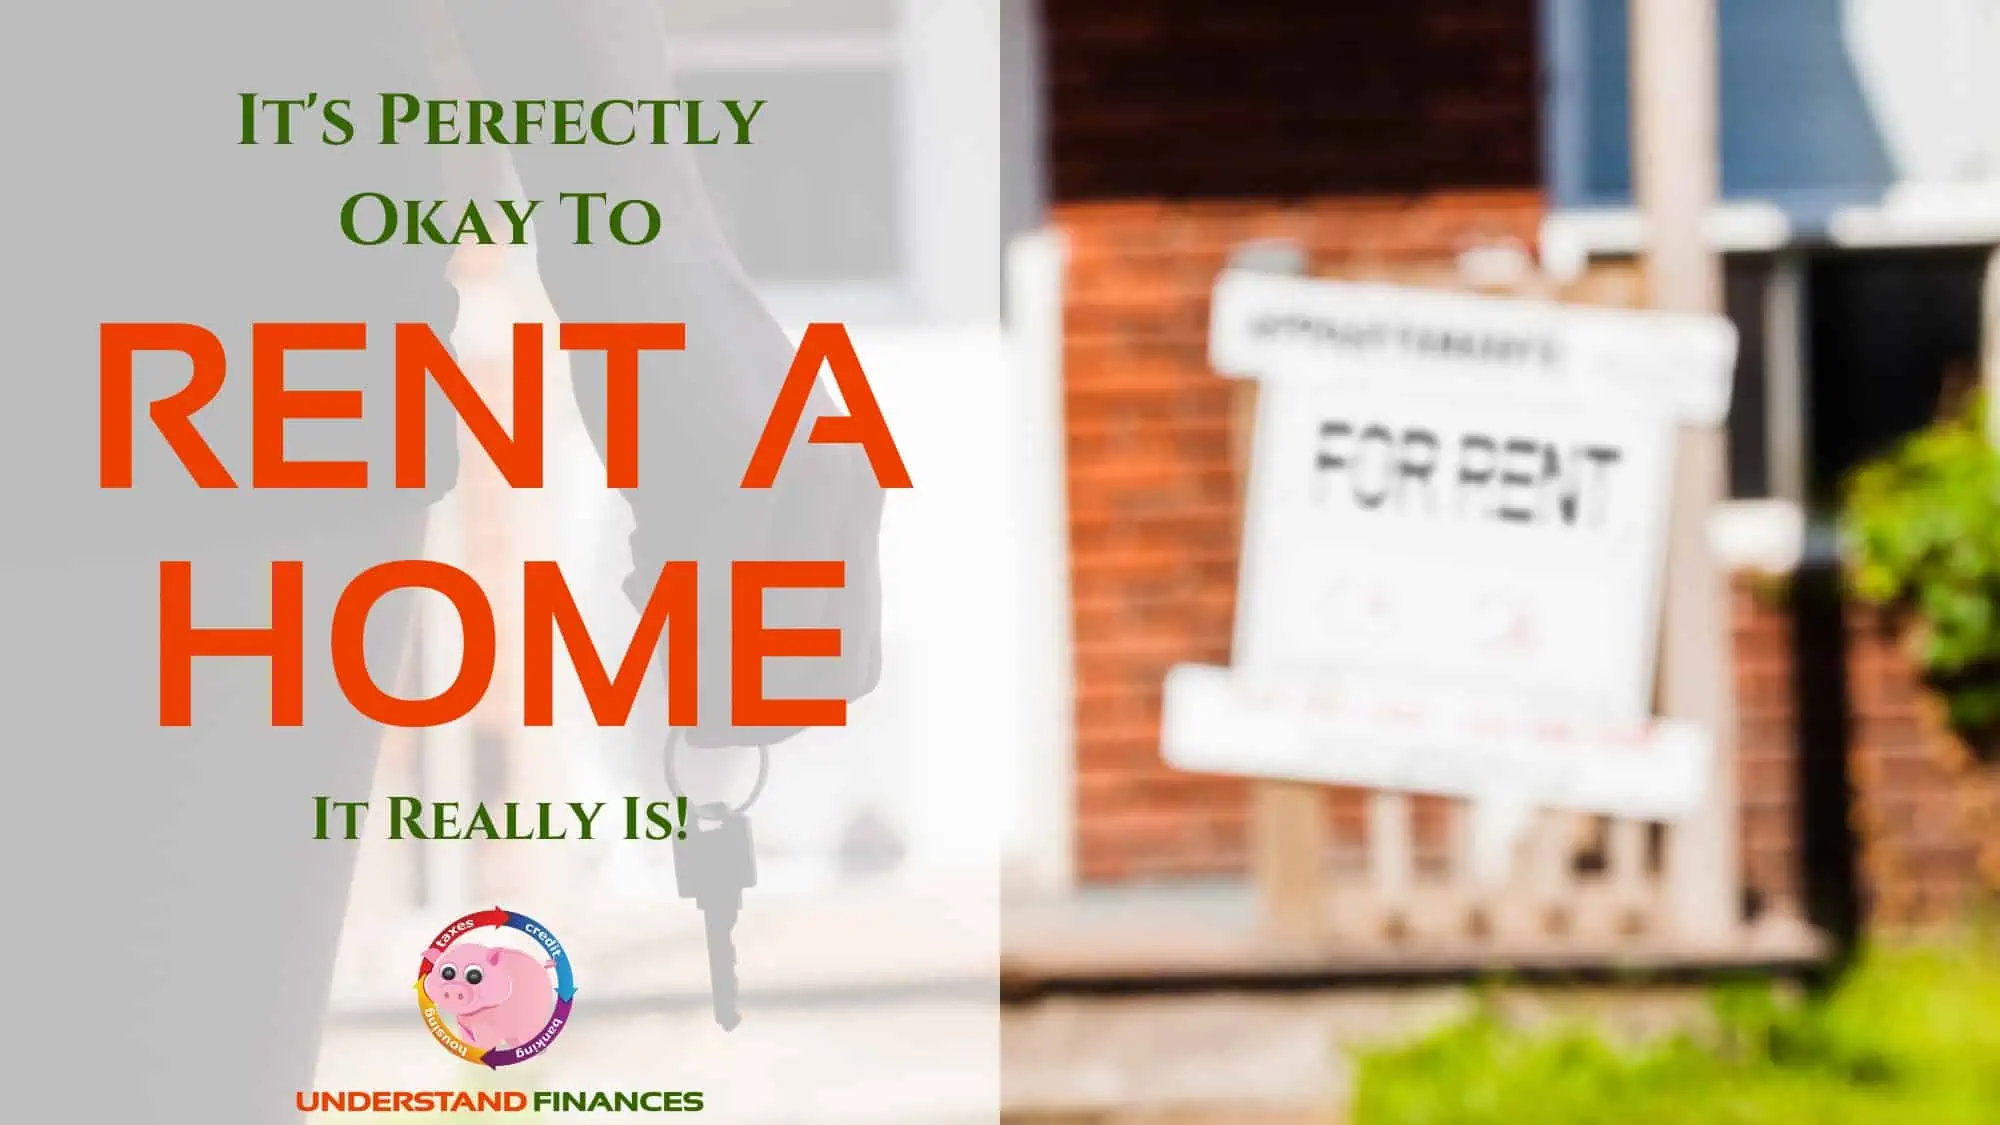 It’s Perfectly Okay To Rent A Home. It Really Is!